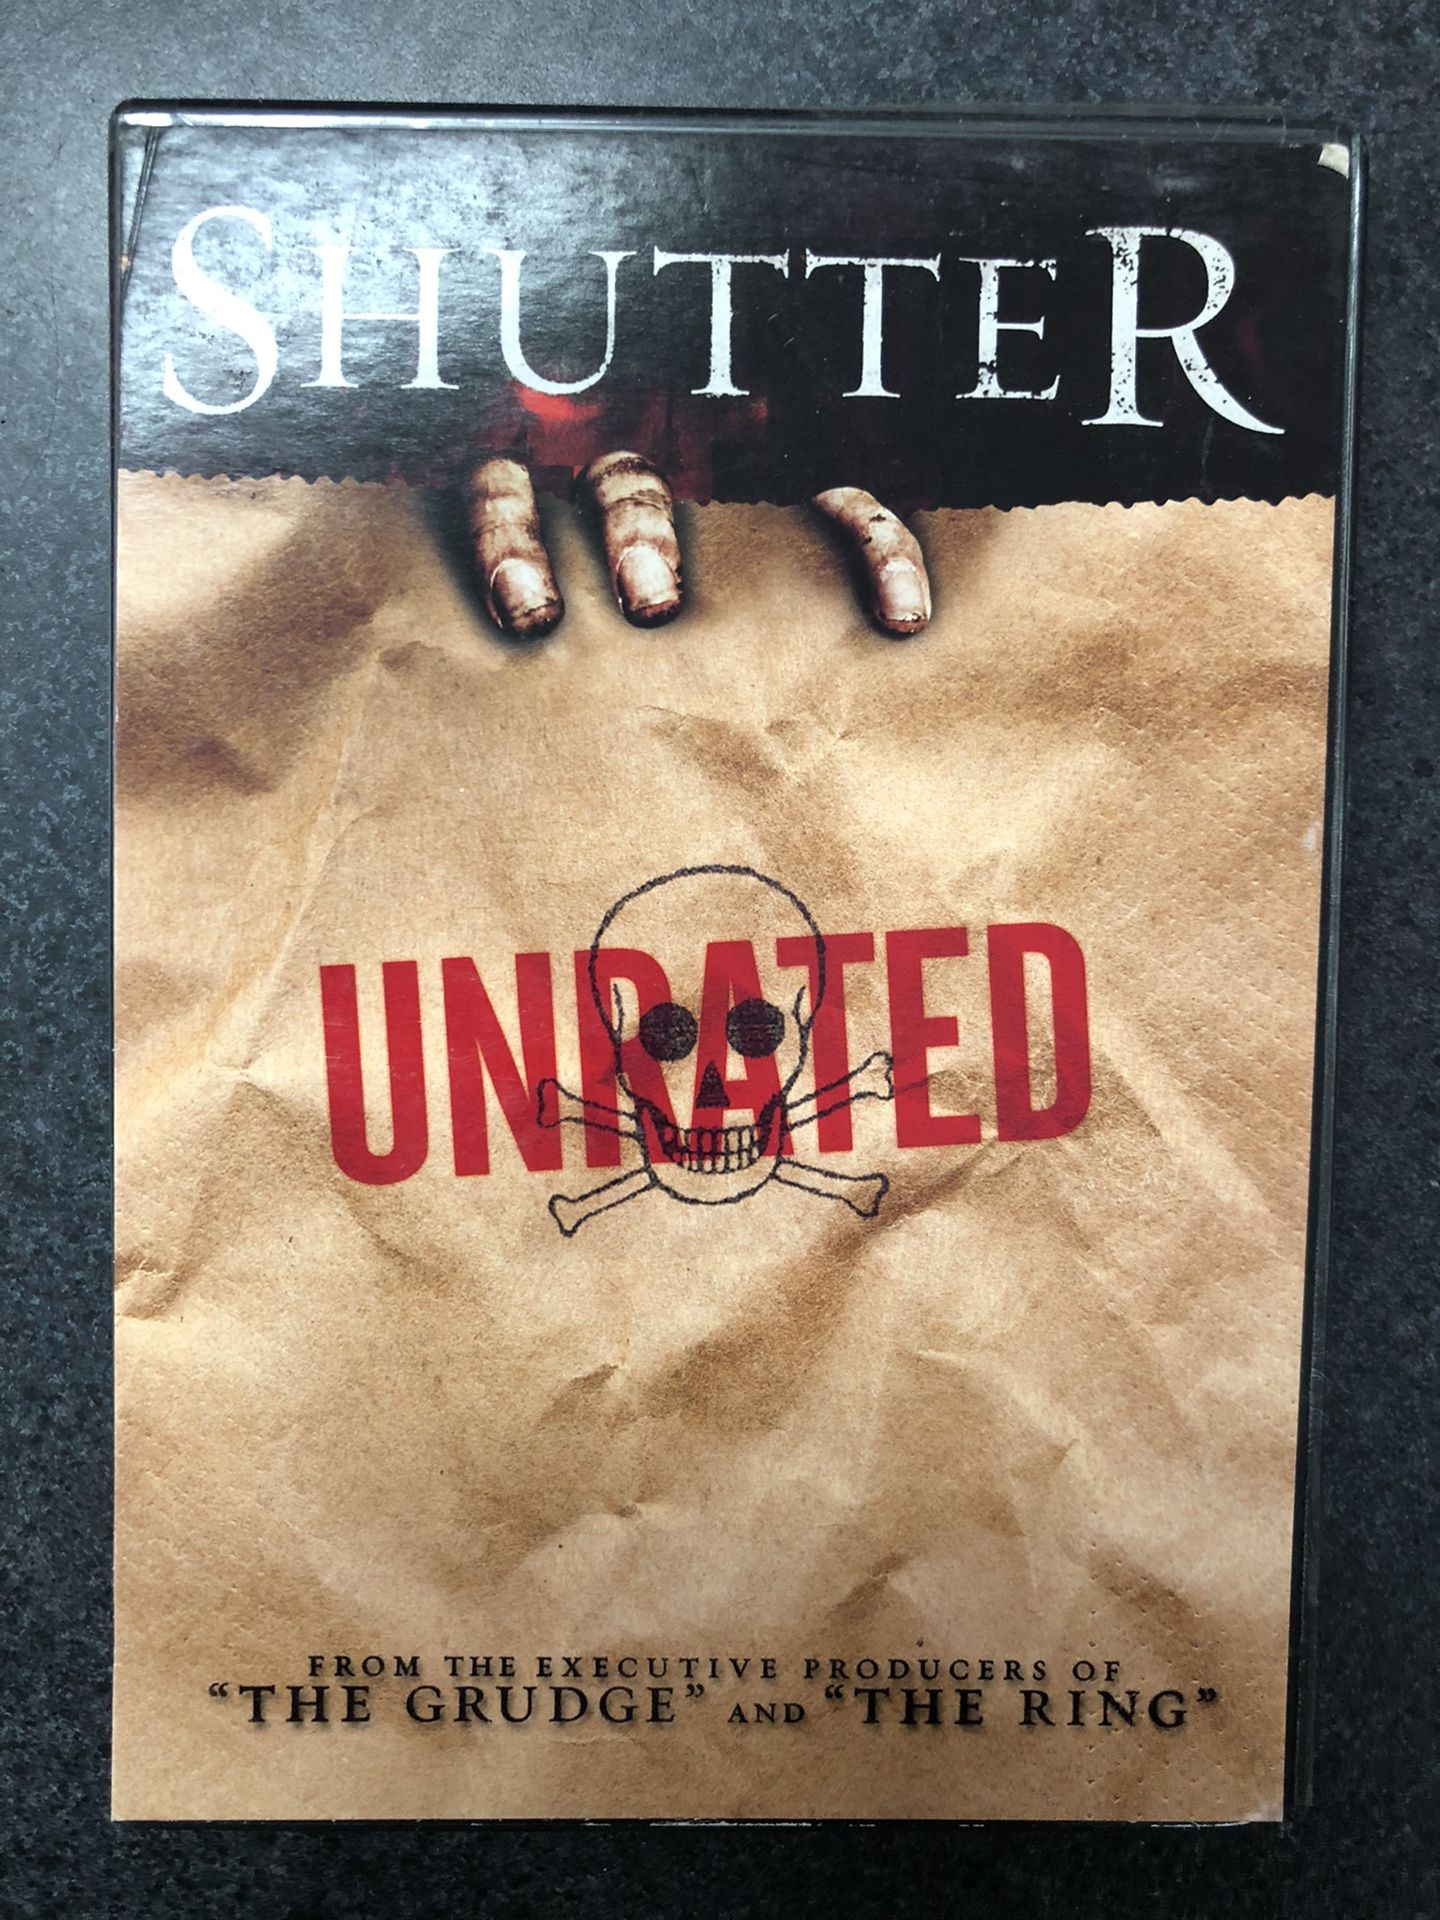 Shutter DVD - Unrated Edition